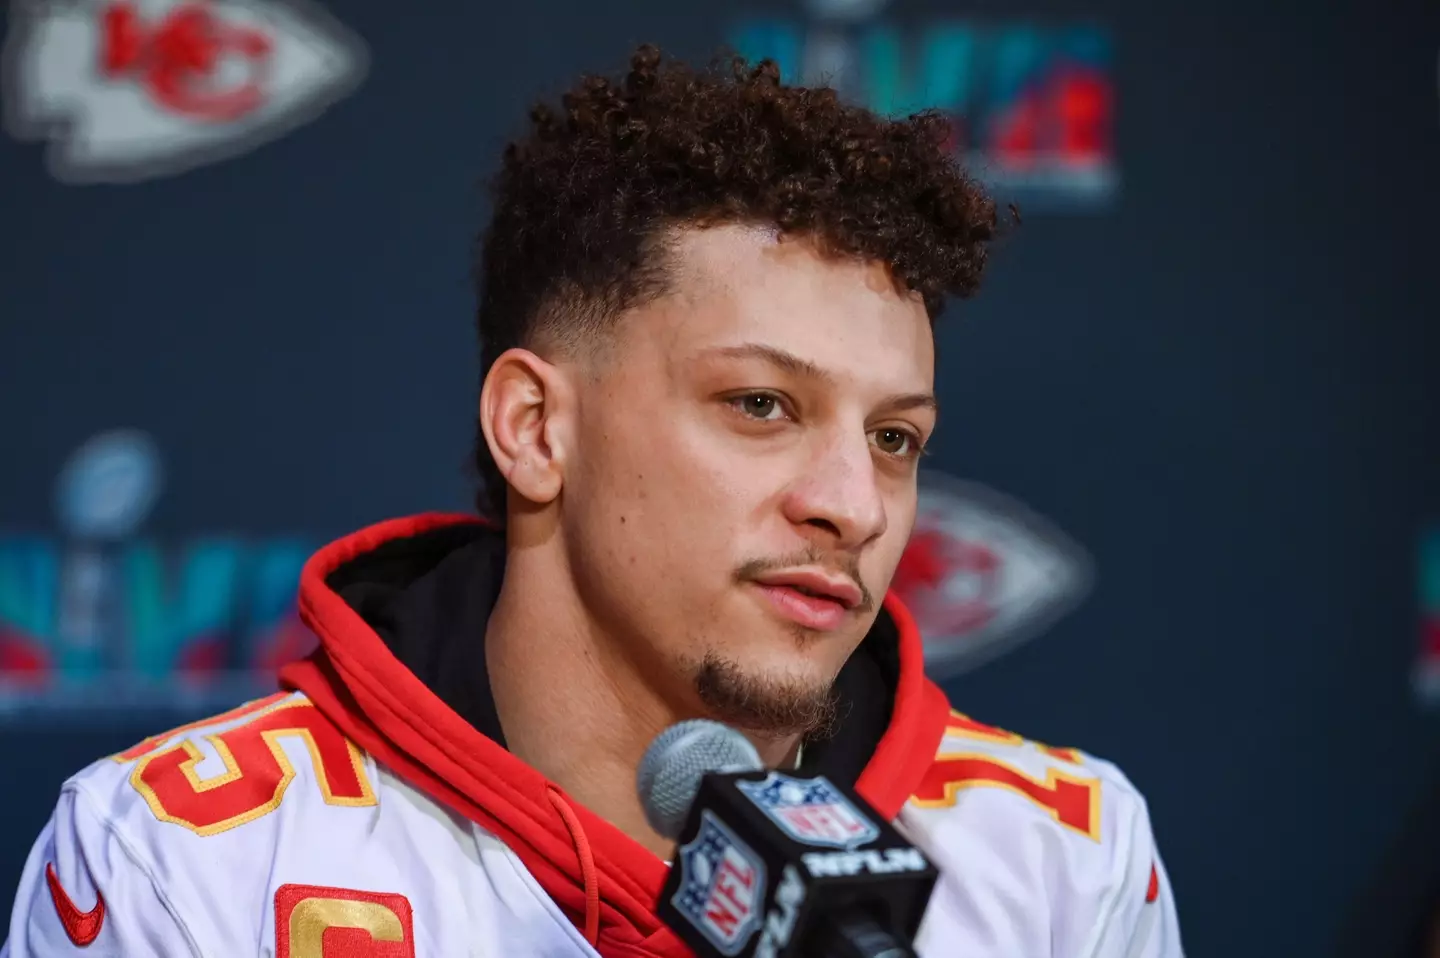 Patrick Mahomes led the Kansas City Chiefs to victory in the Super Bowl.